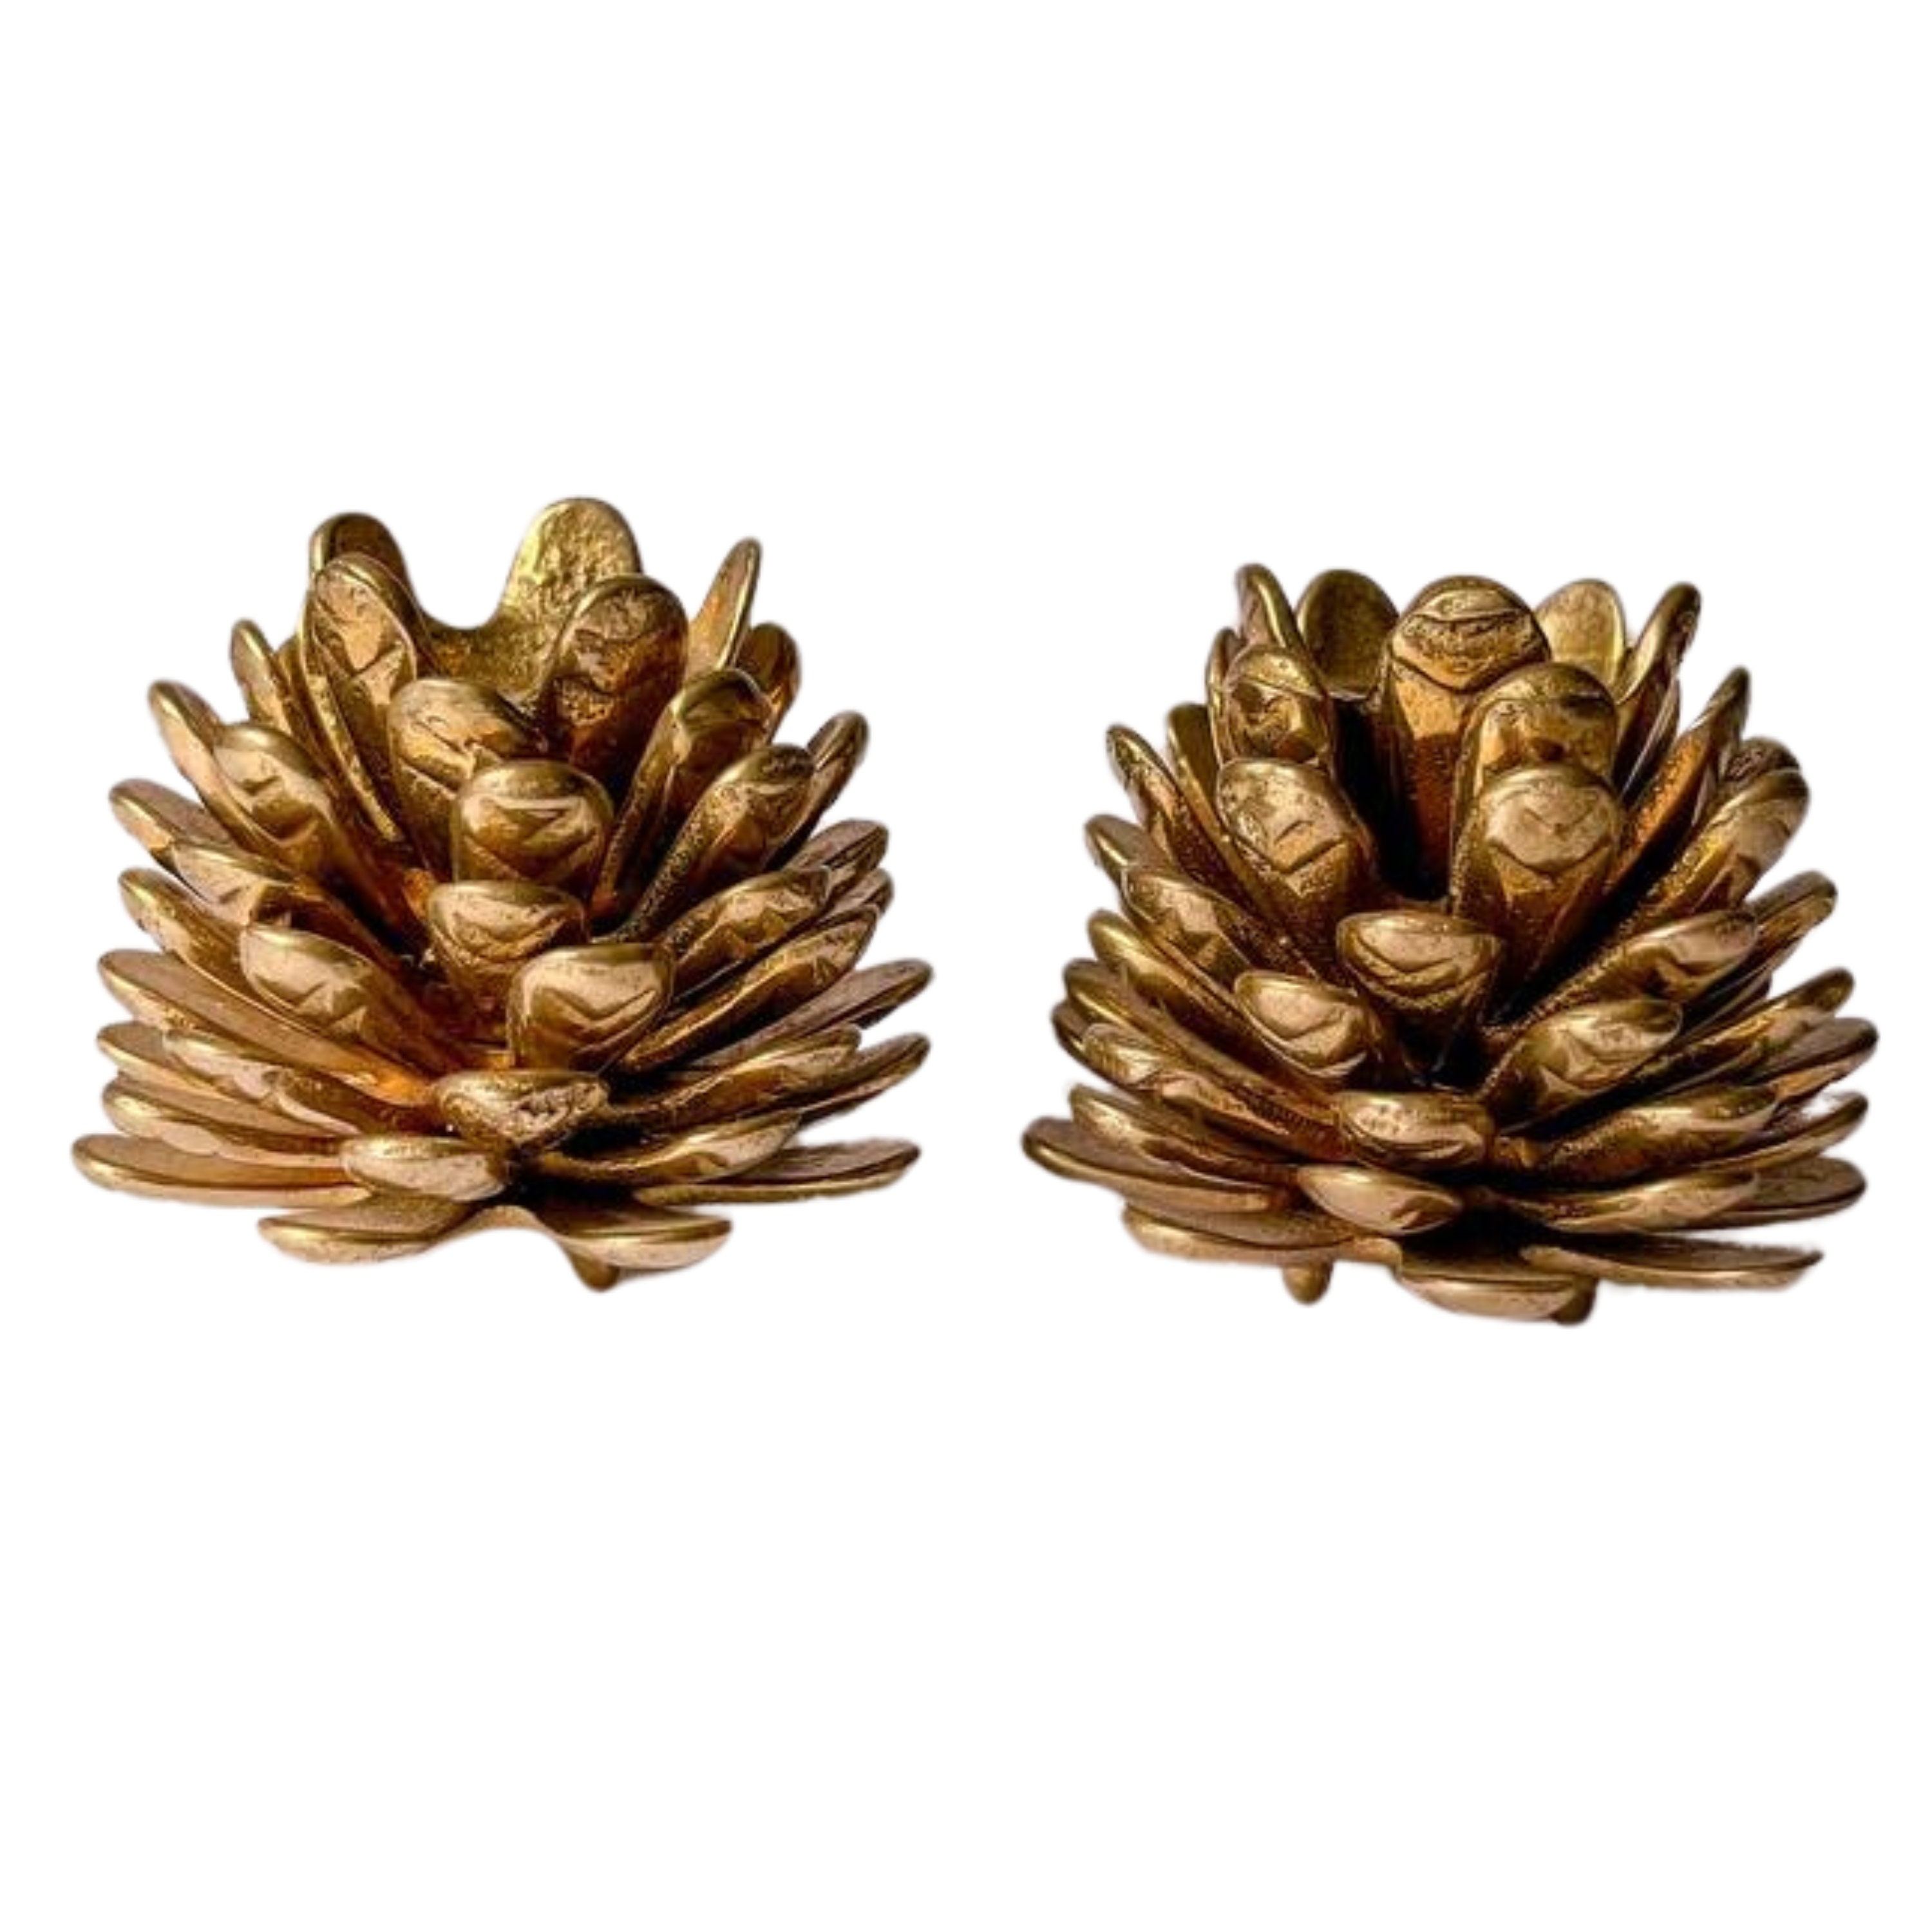 cheap purchase online store Vintage Brass Brass of Pinecone Pine  Candlestick Vintage Holders Holders 